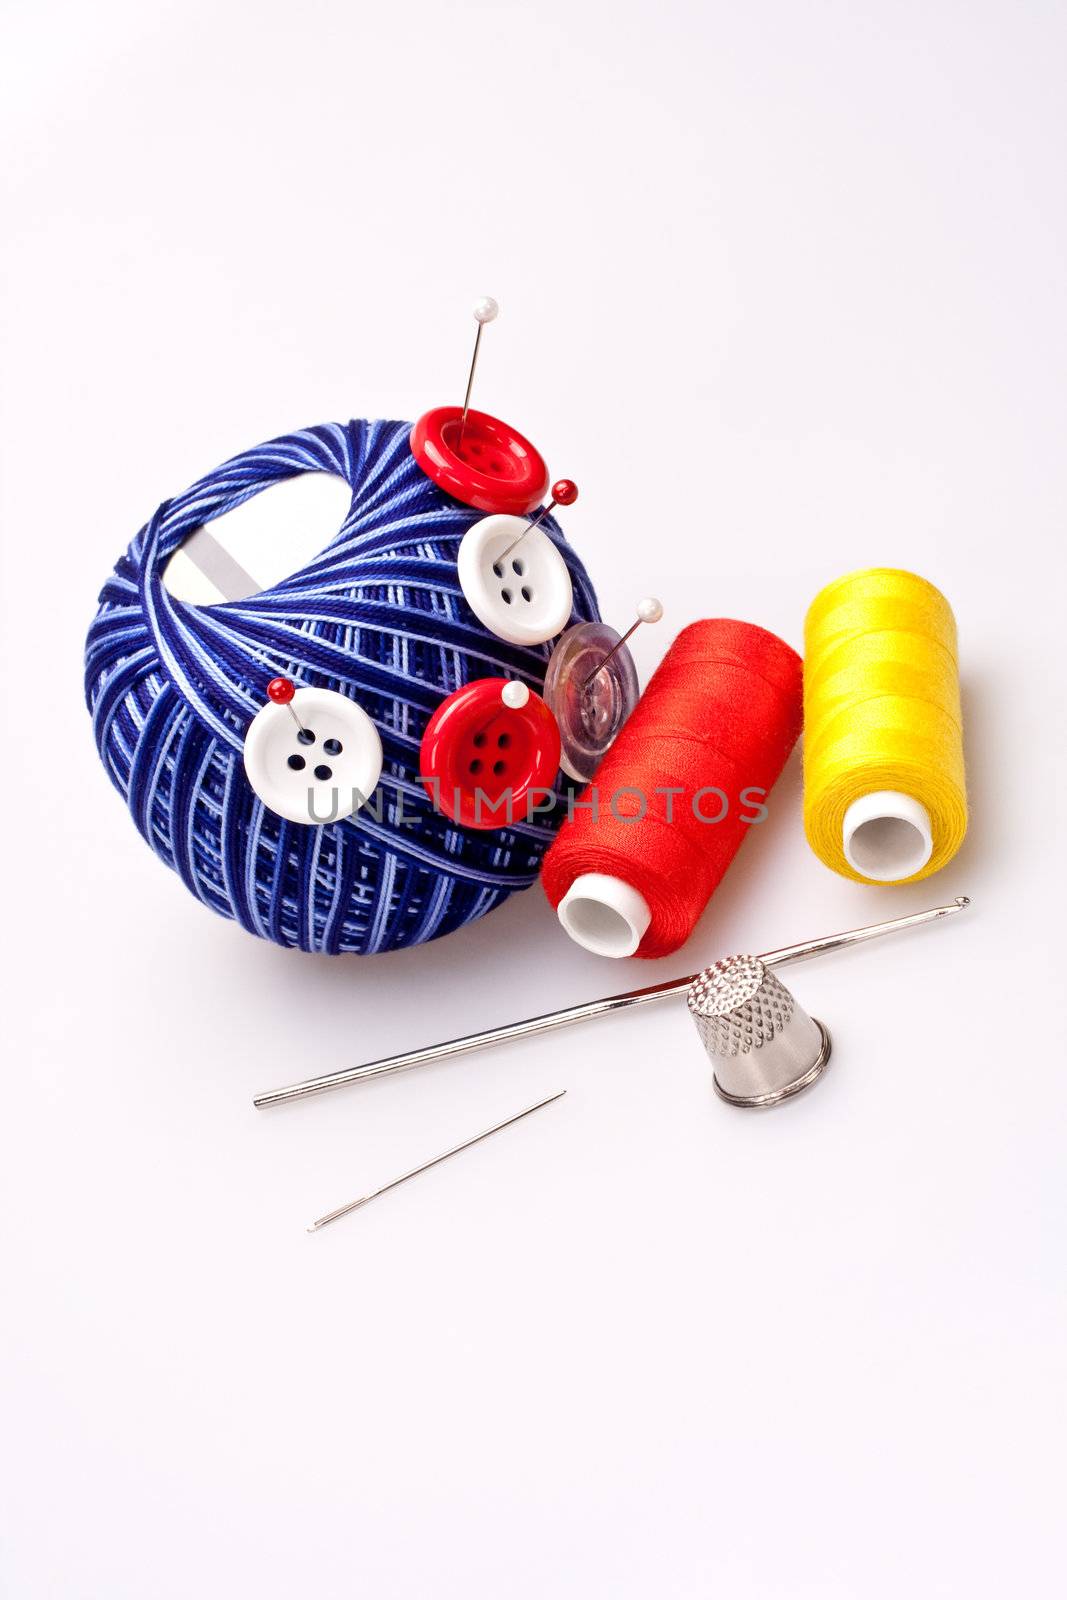 pins in wool ball with buttons by Lupen